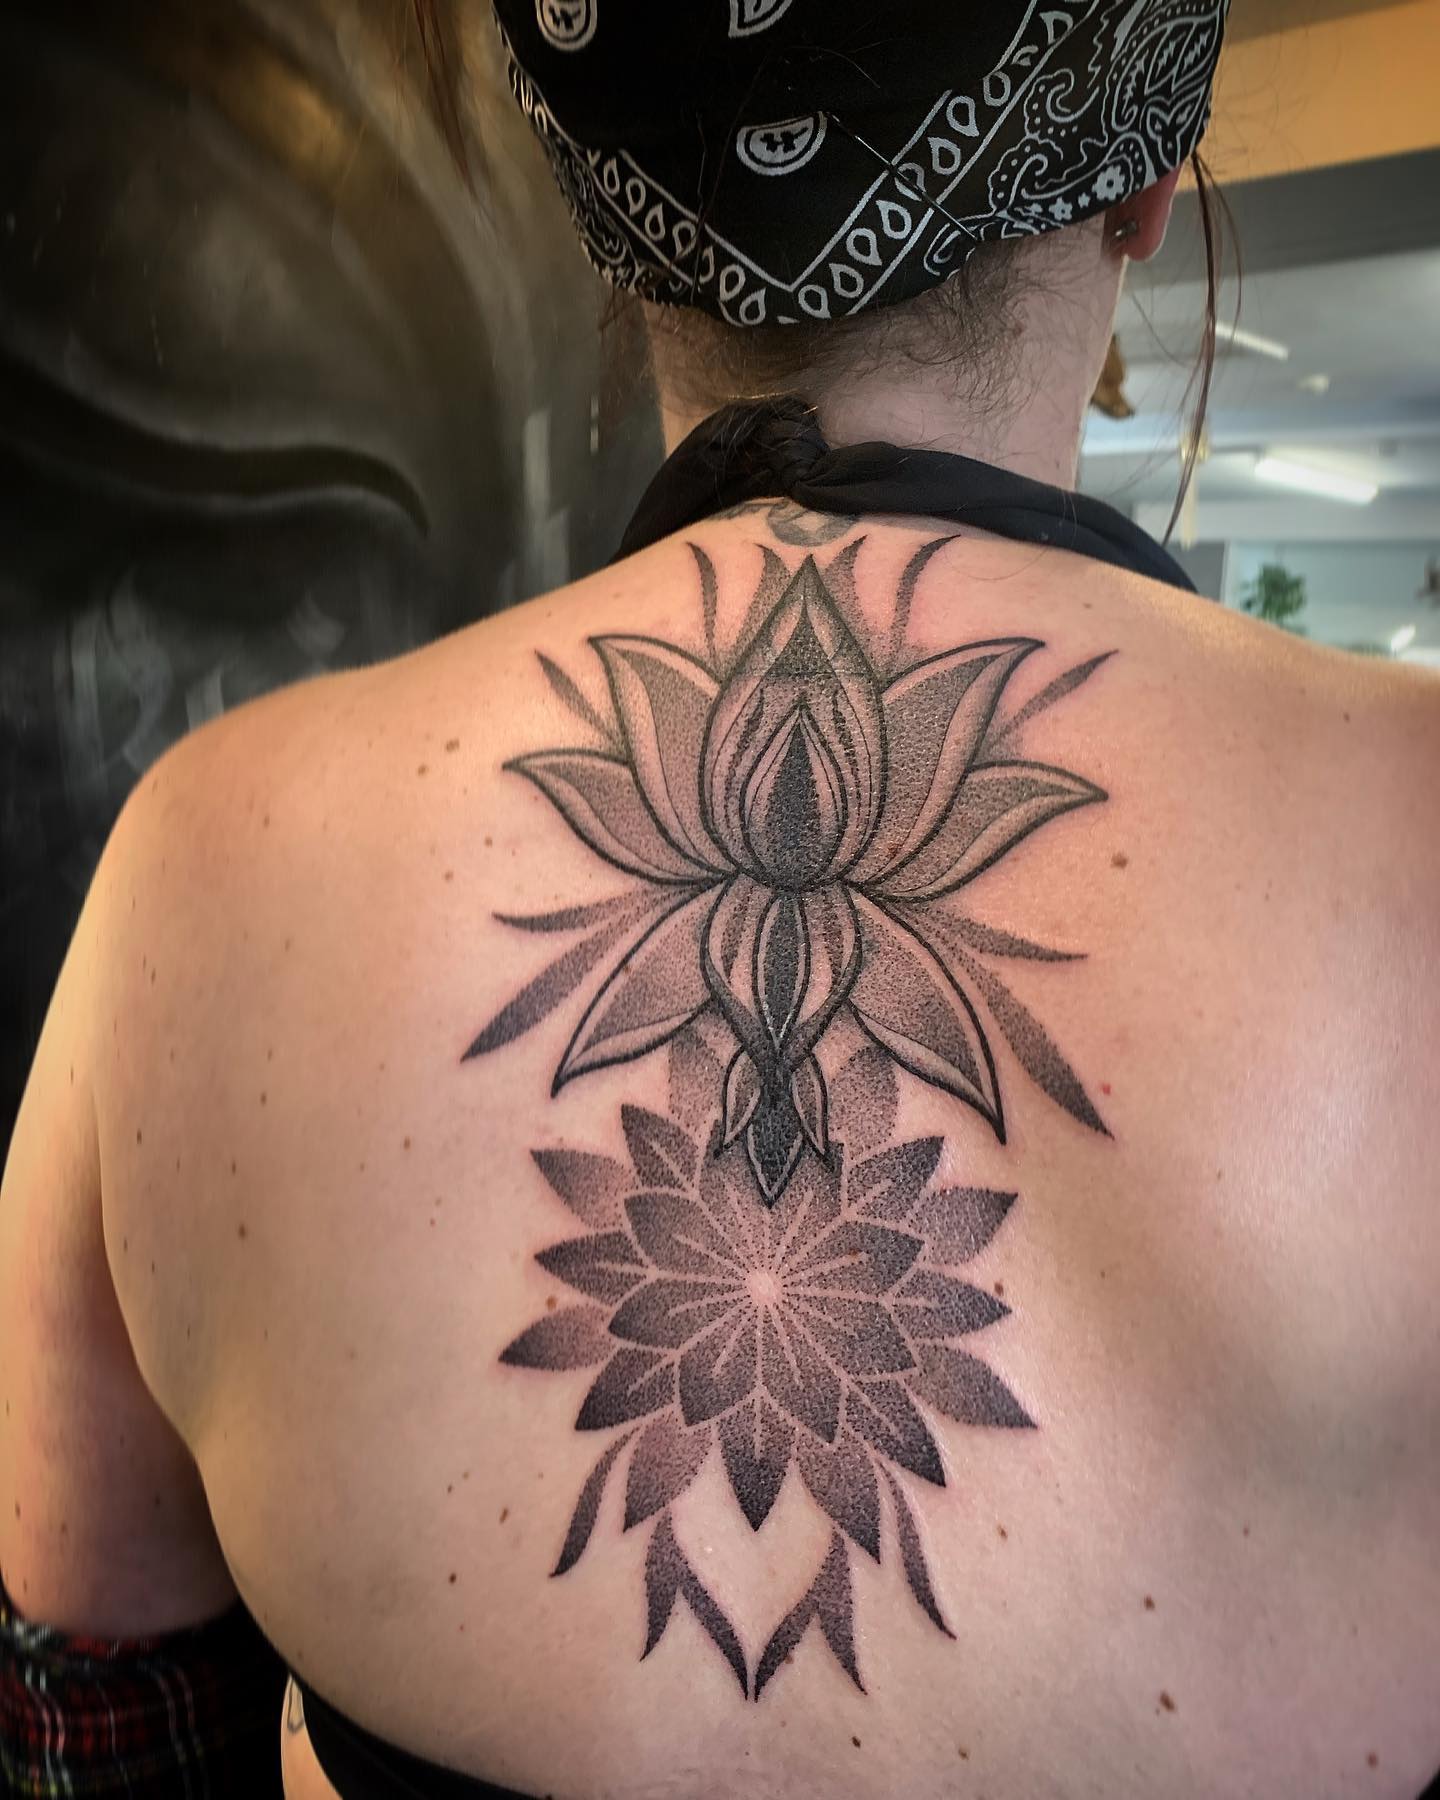 Lotus Flower Tattoos: Meaning, Symbolism and 30+ Examples - 100 Tattoos